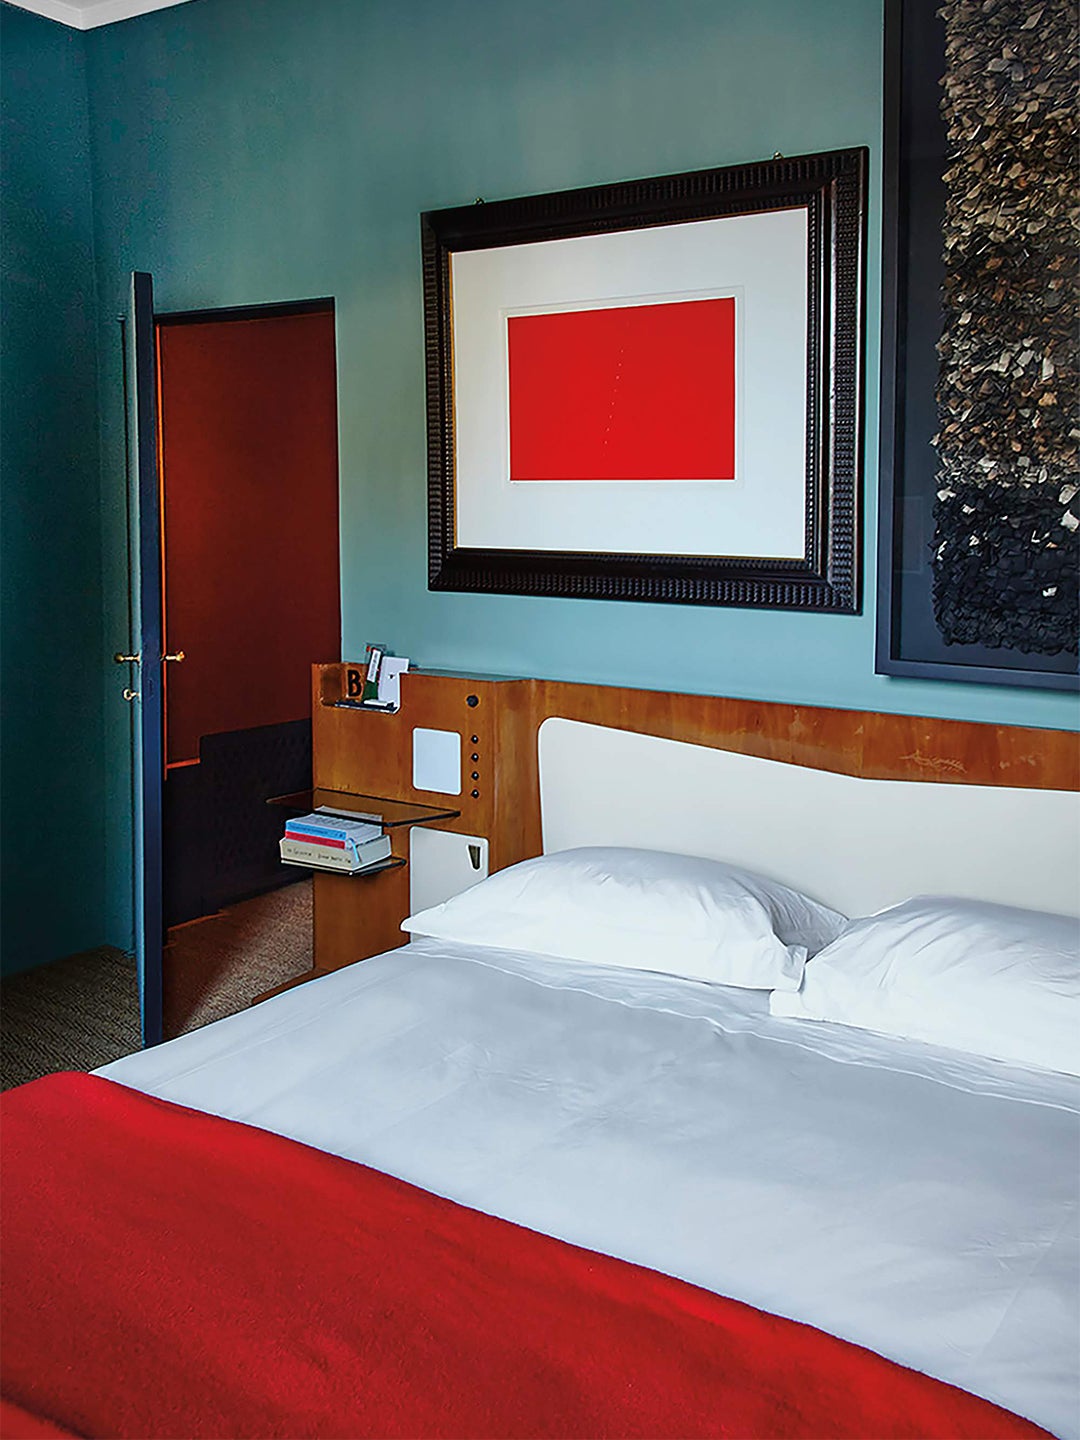 Blue bedroom with red quilt